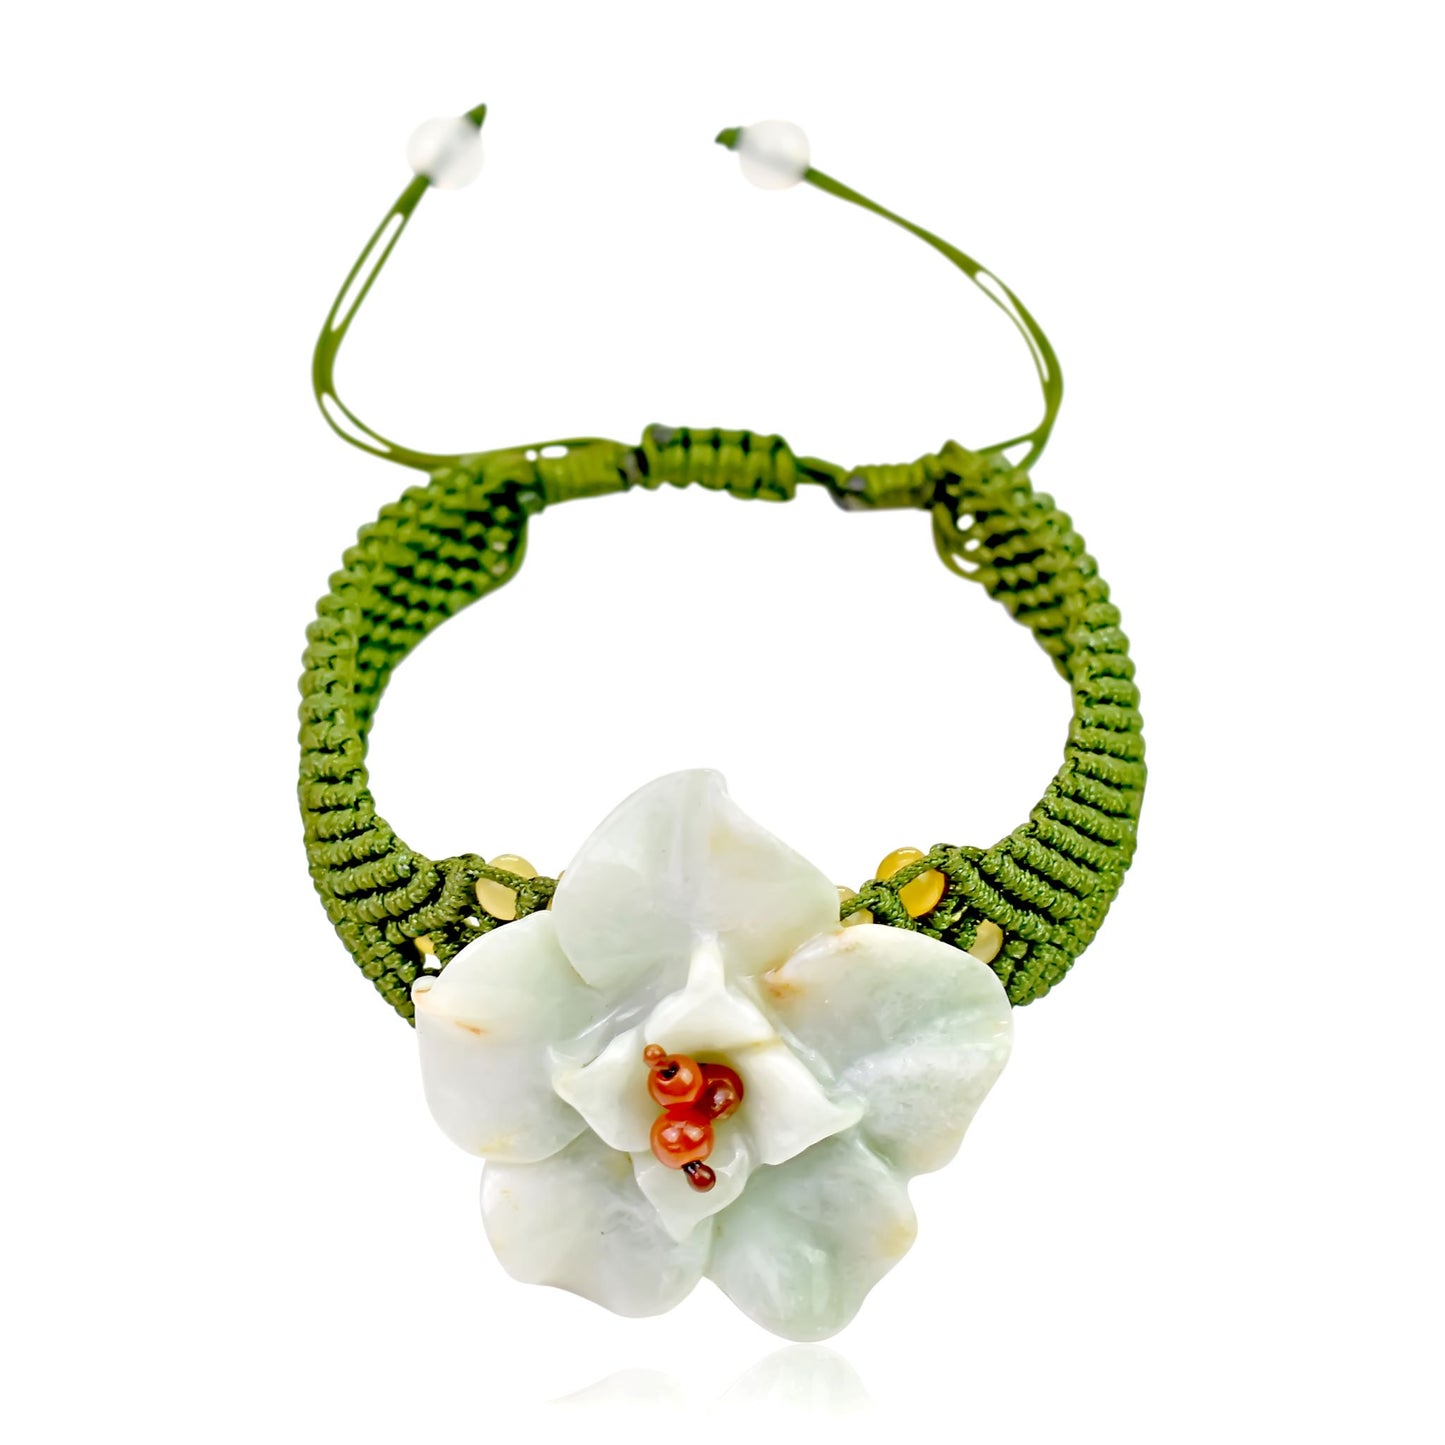 Get Eye-Catching Style with the Hoya Jade Bracelet made with Lime Cord